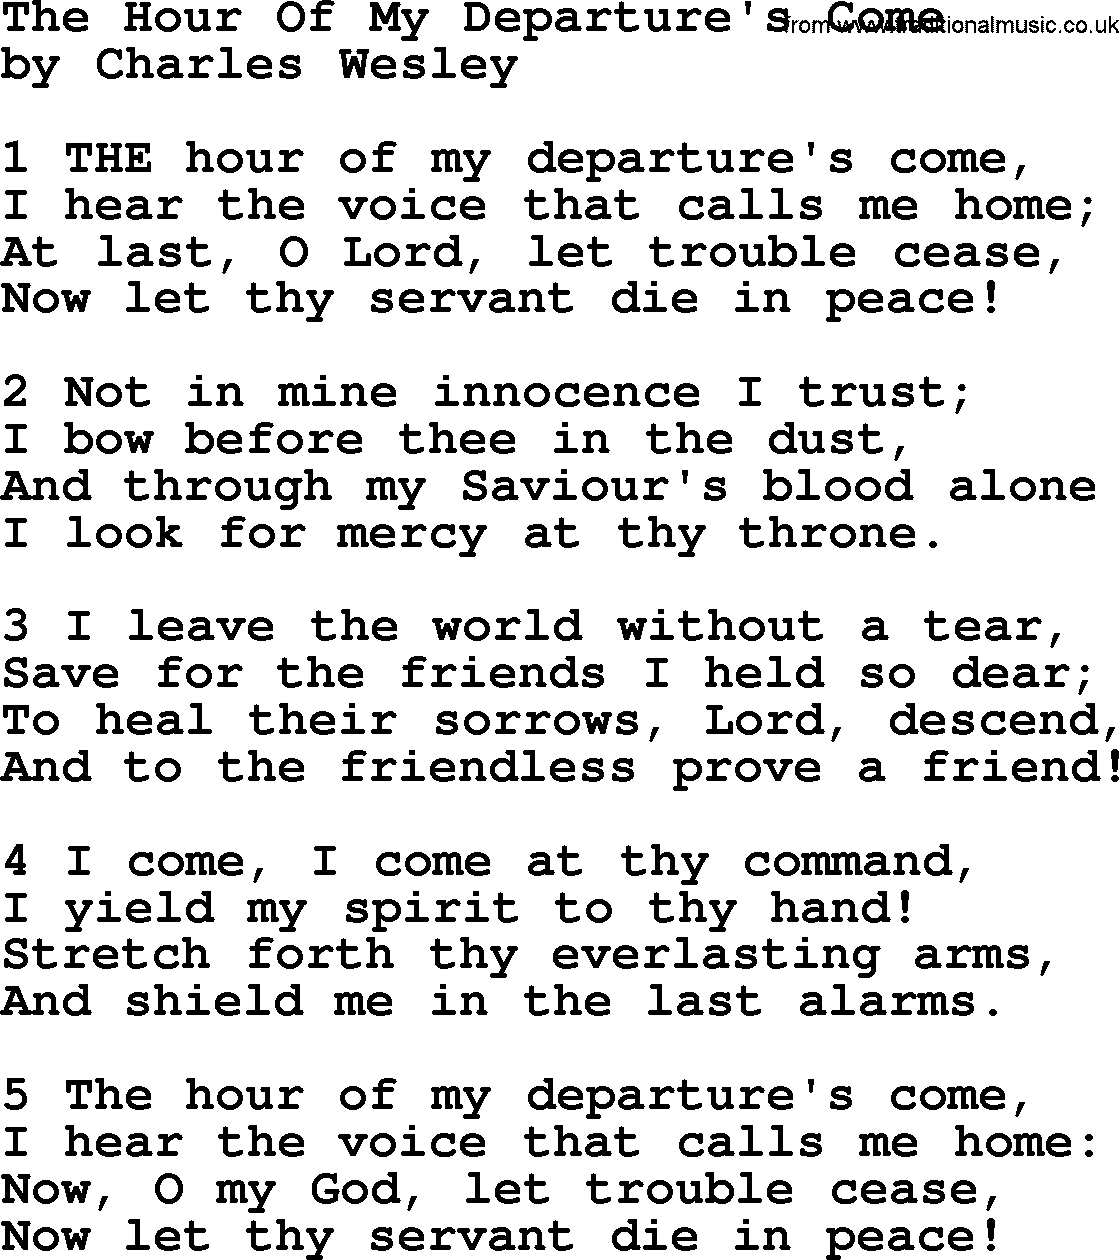 Charles Wesley hymn: The Hour Of My Departure's Come, lyrics